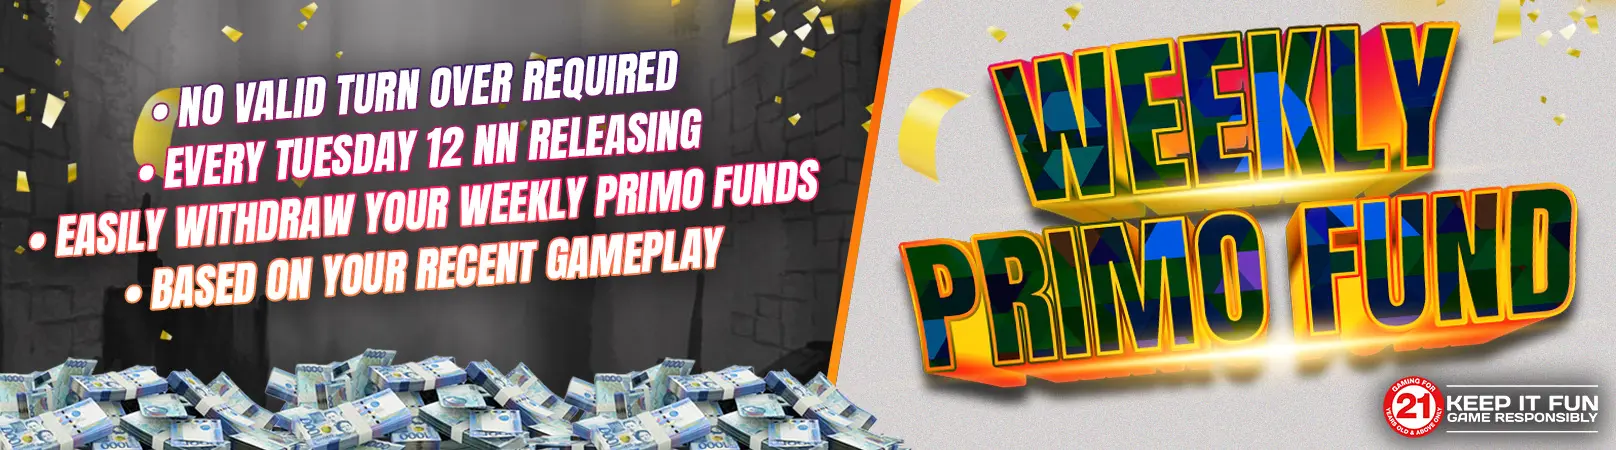 Weekly Primo Fund